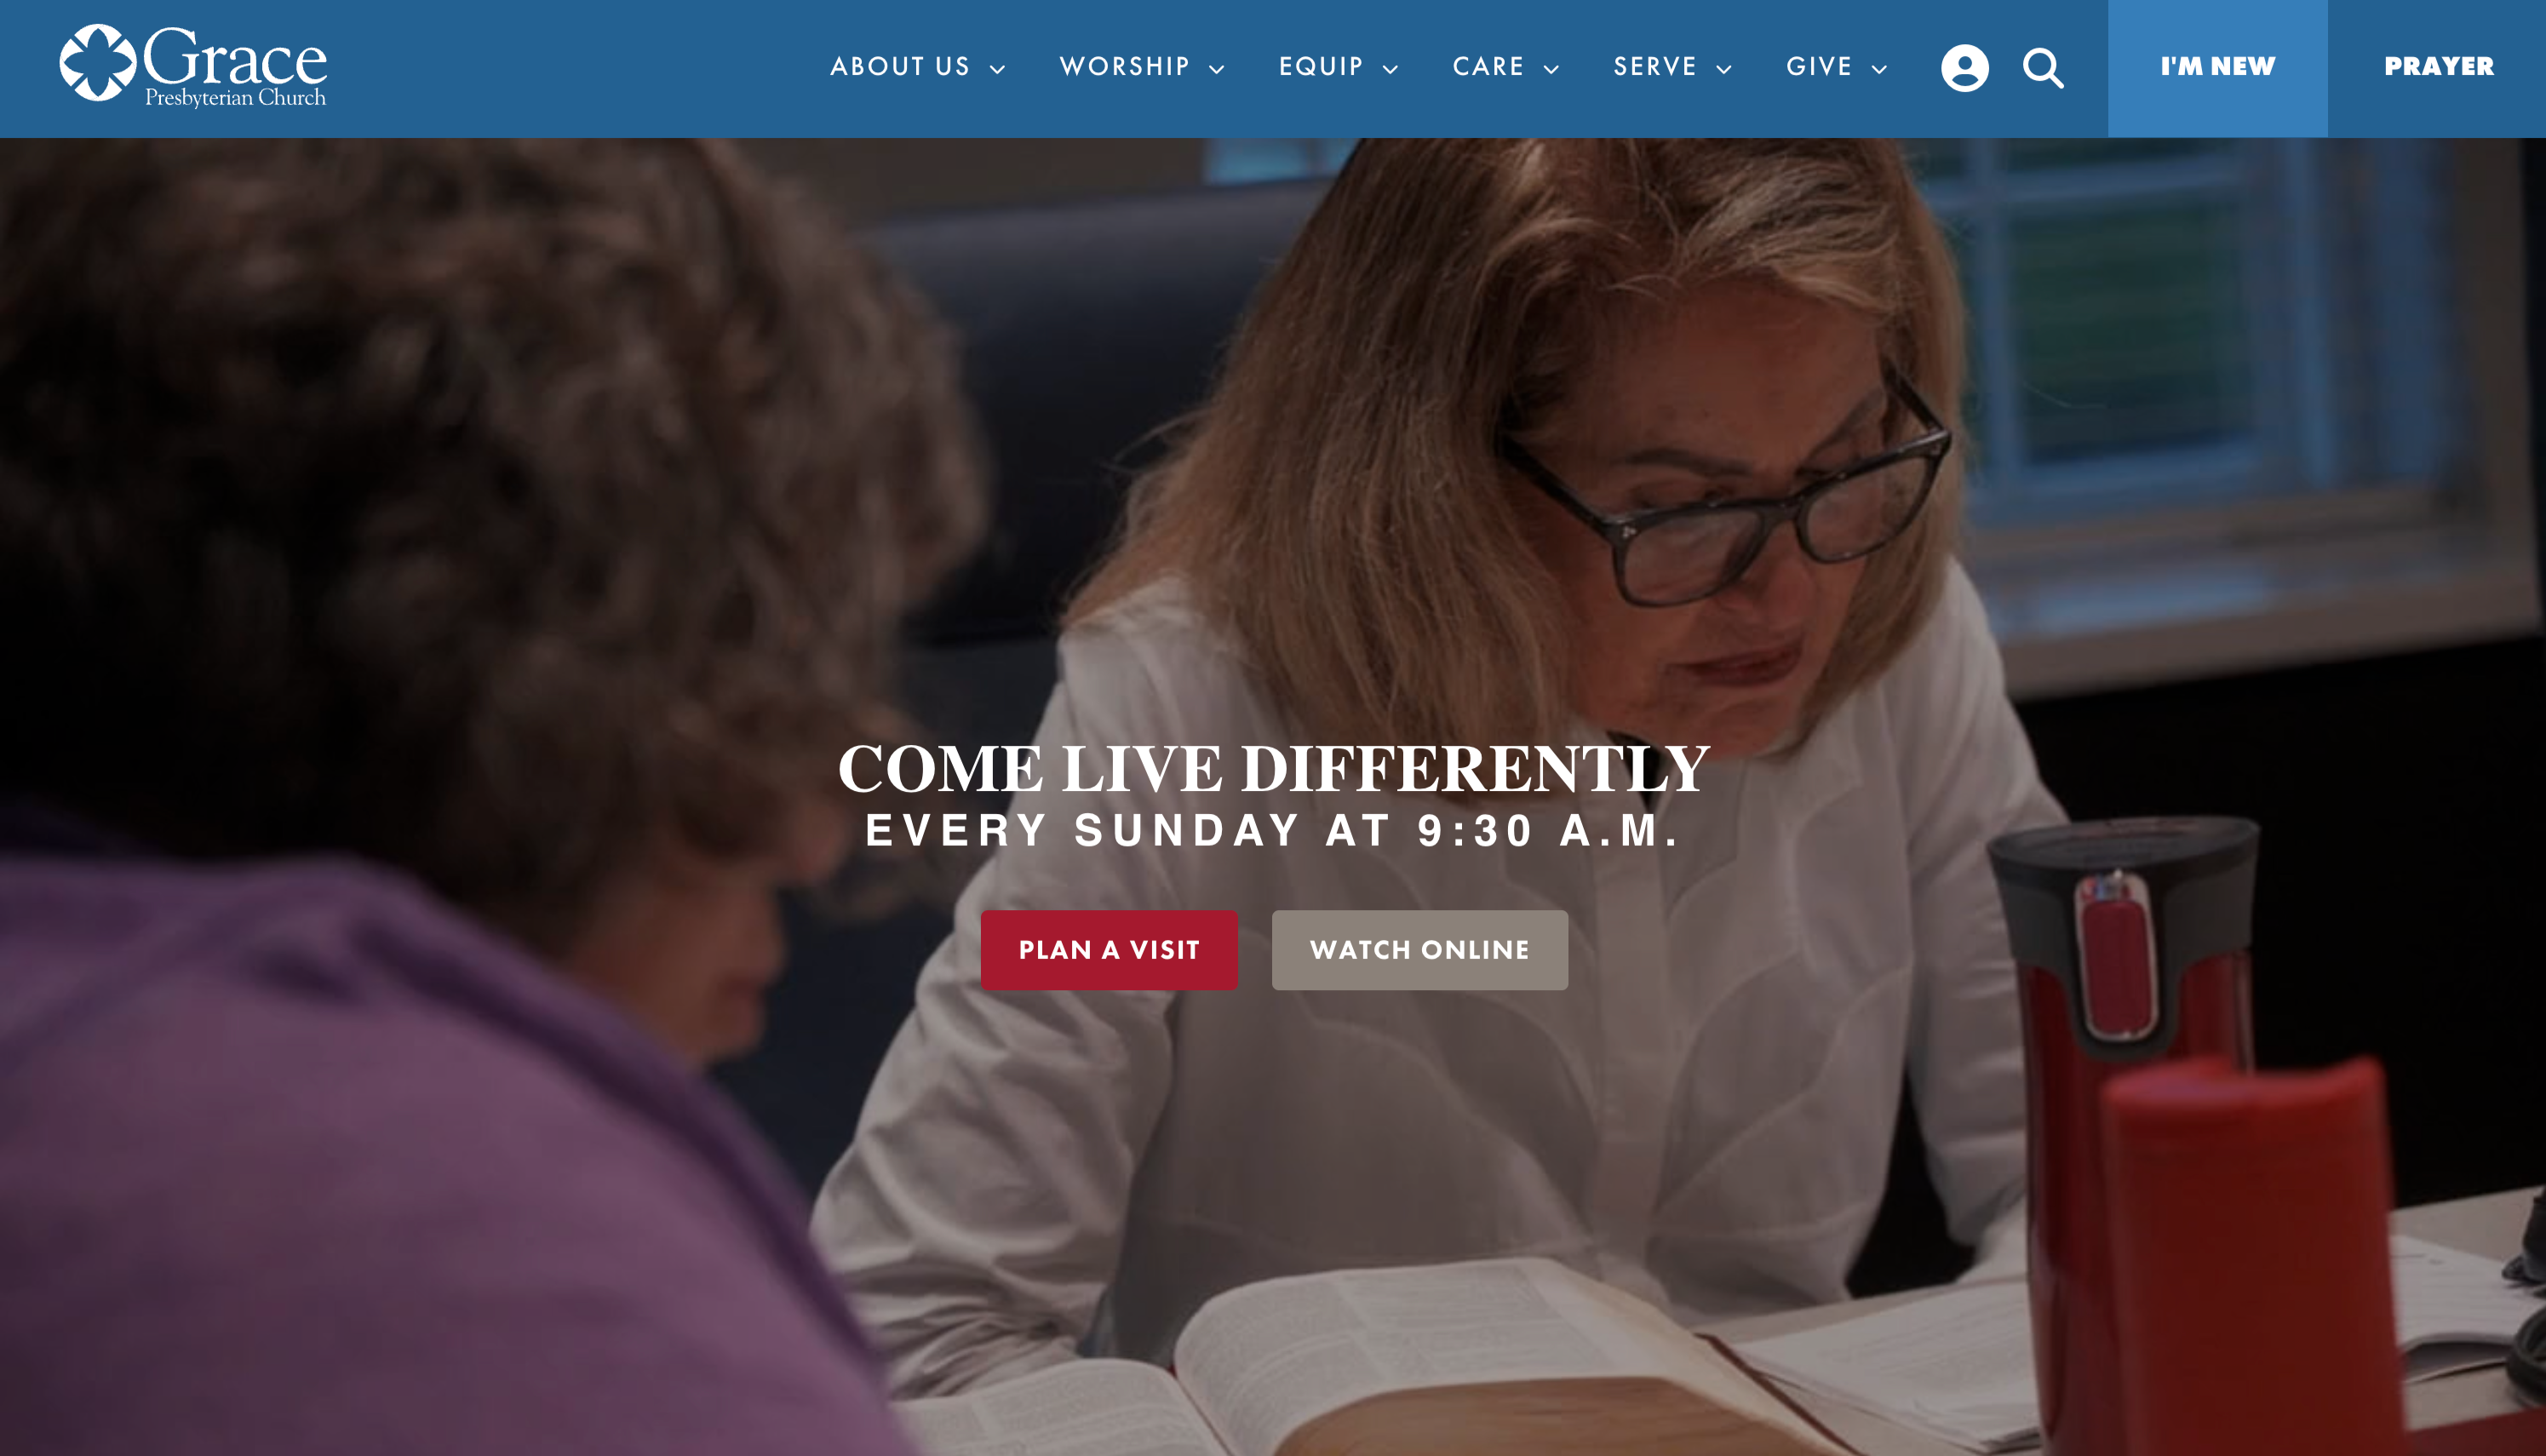 Website image from Grace Presbyterian Church located in Houston, TX.